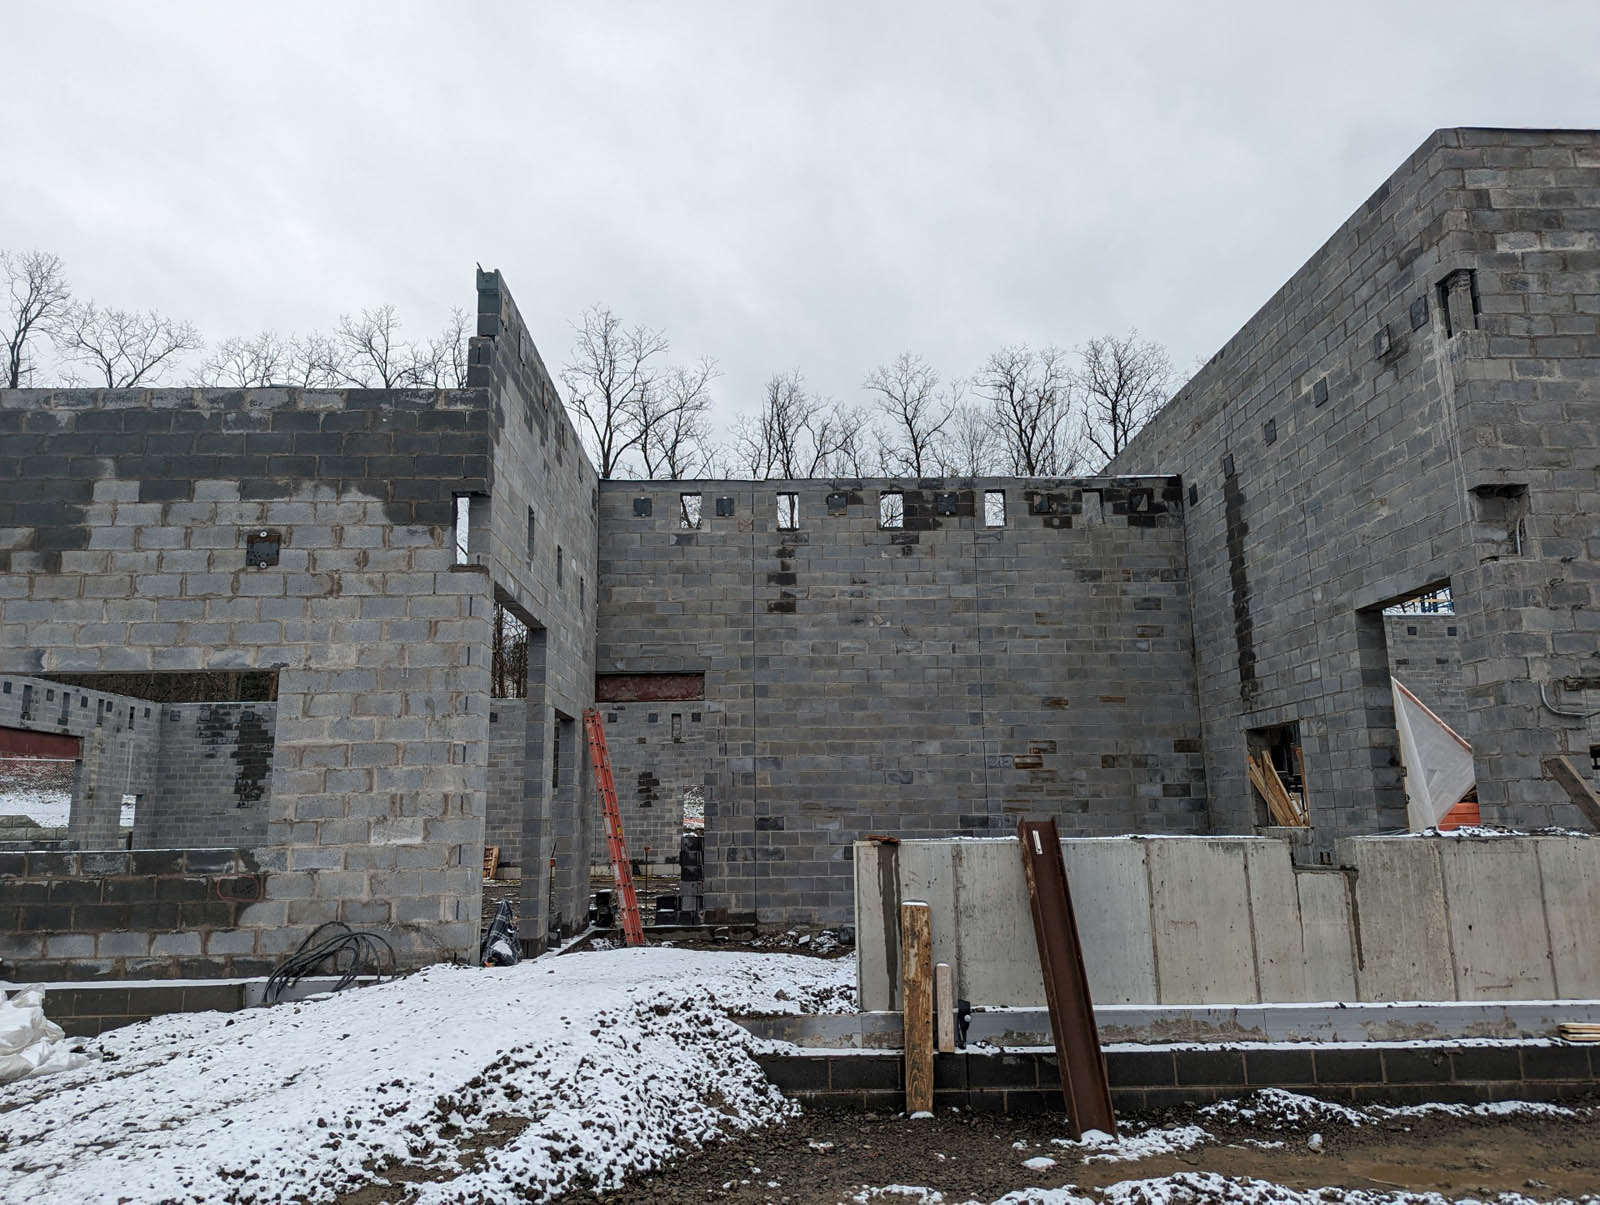 The Station 4 replacement continues to make headway with the west wall nearing completion